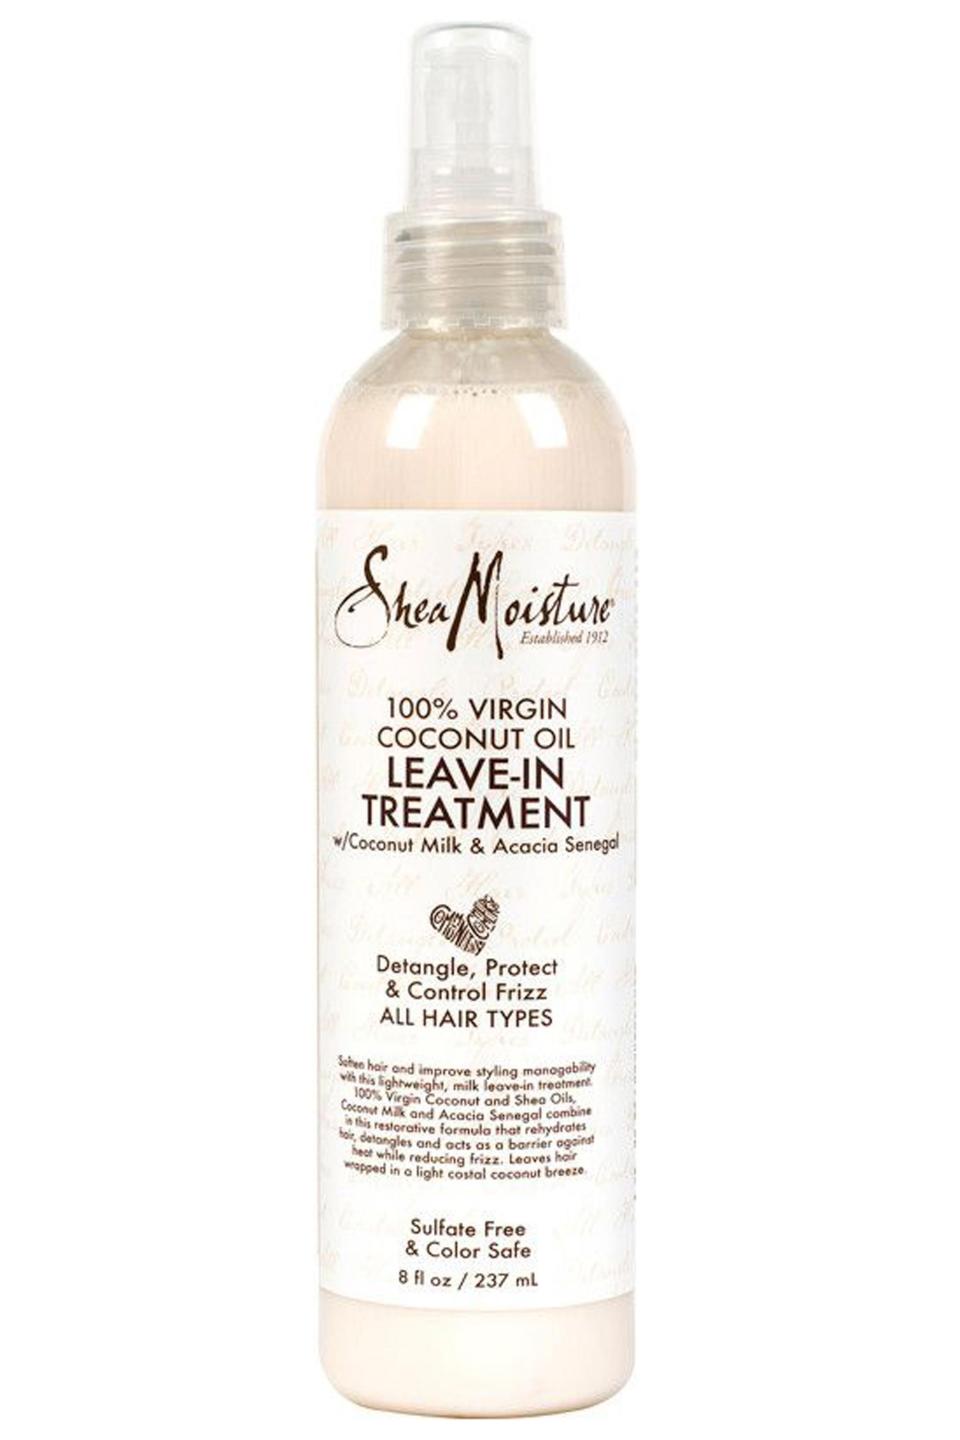 7) SheaMoisture 100% Virgin Coconut Oil Daily Hydration Leave-In Treatment